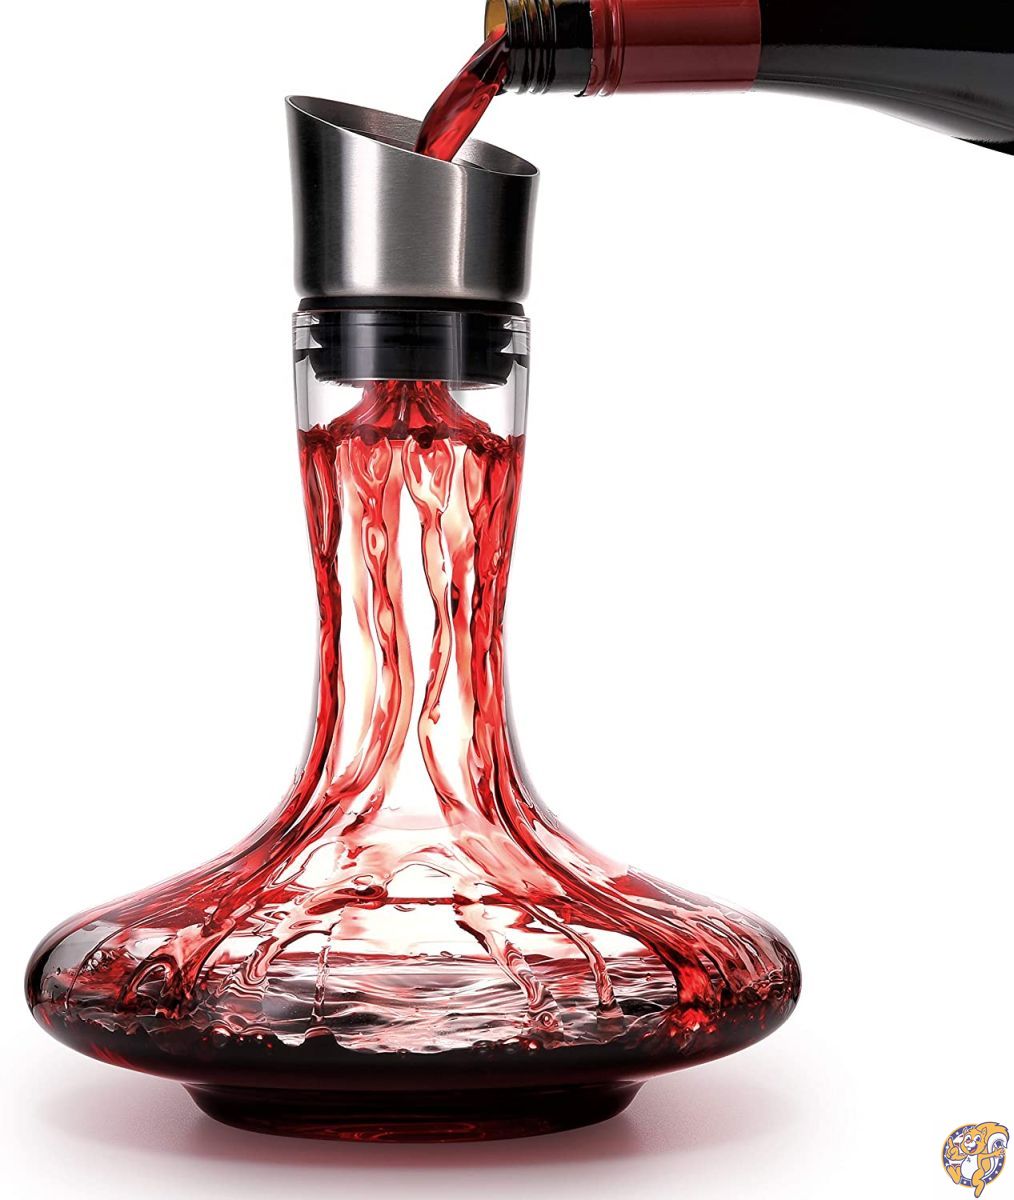 Wine Decanter Built-in Aerator Pourer, Wine Carafe Red Wine Decanter,100% 送料無料